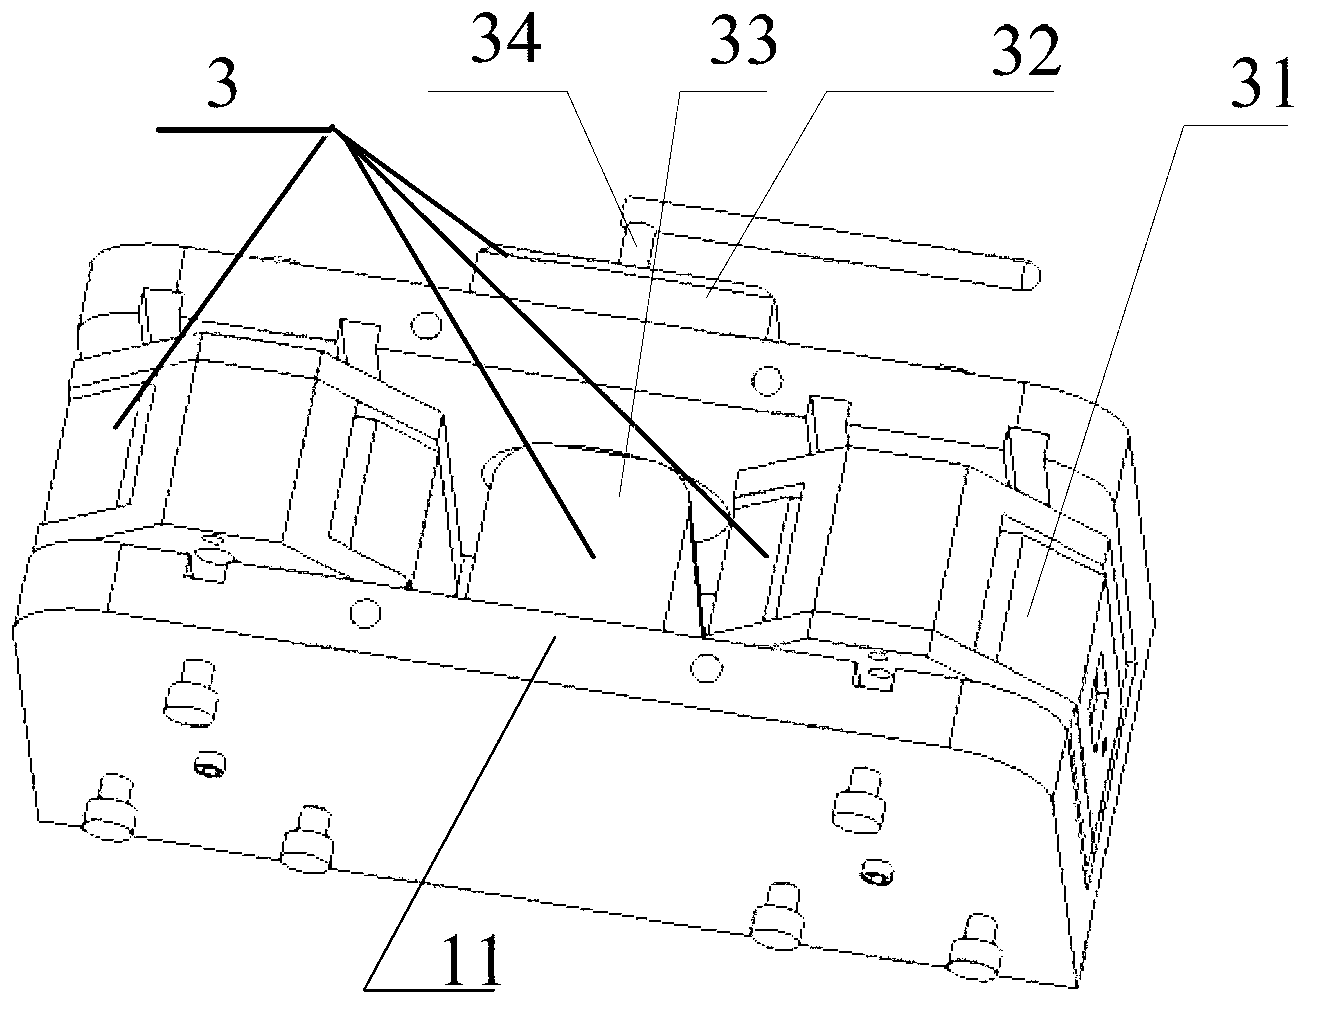 Aperture measuring method based on non-contacting type sensor combination